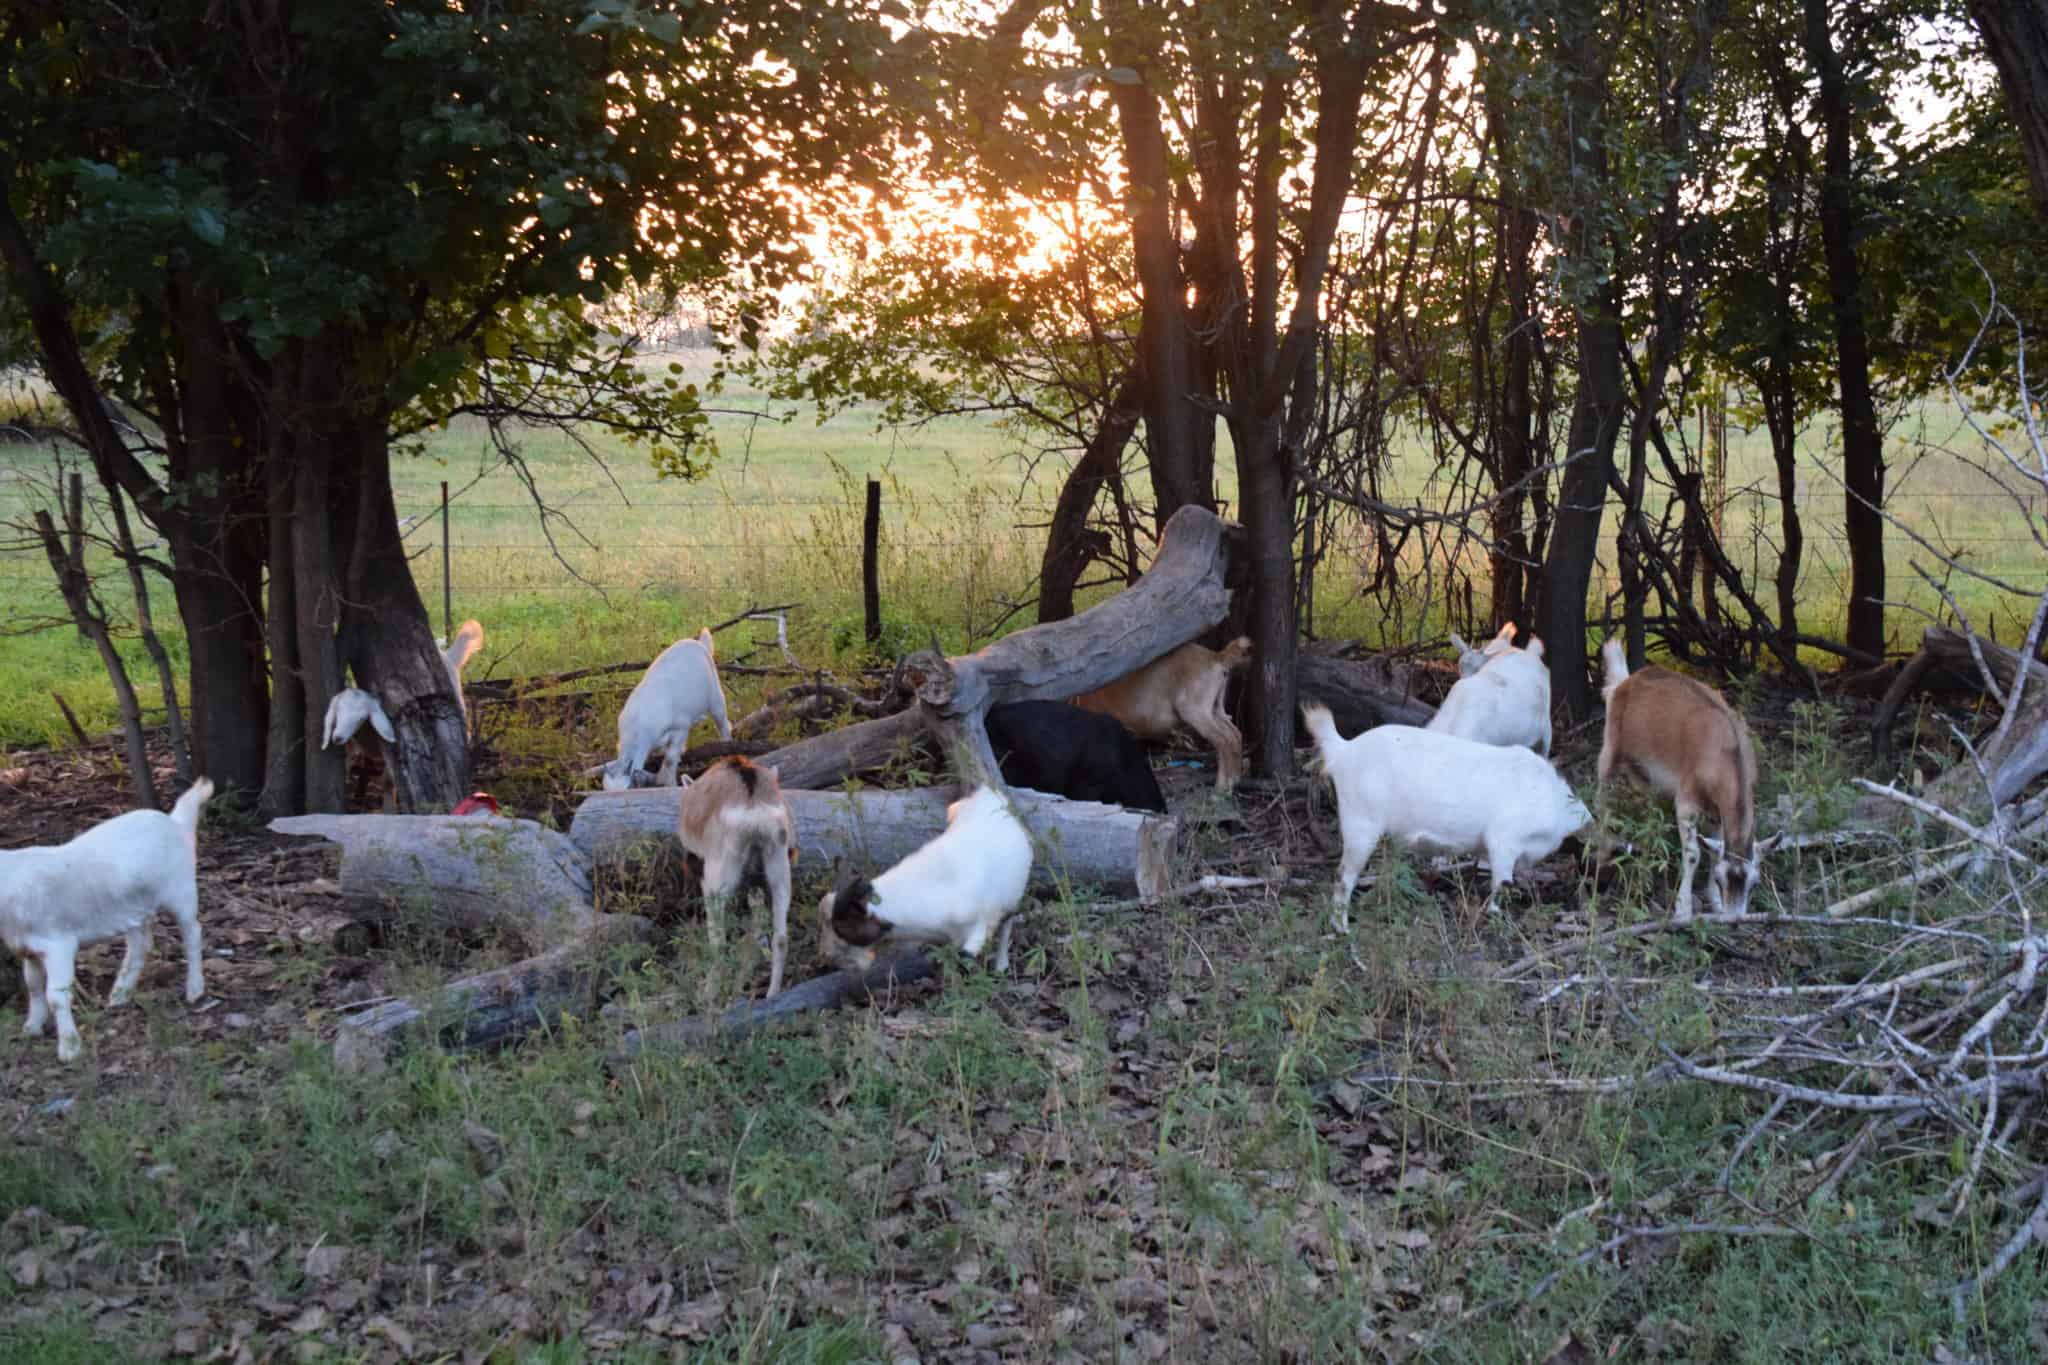 goats in a wooded area, eating and clearing up brush